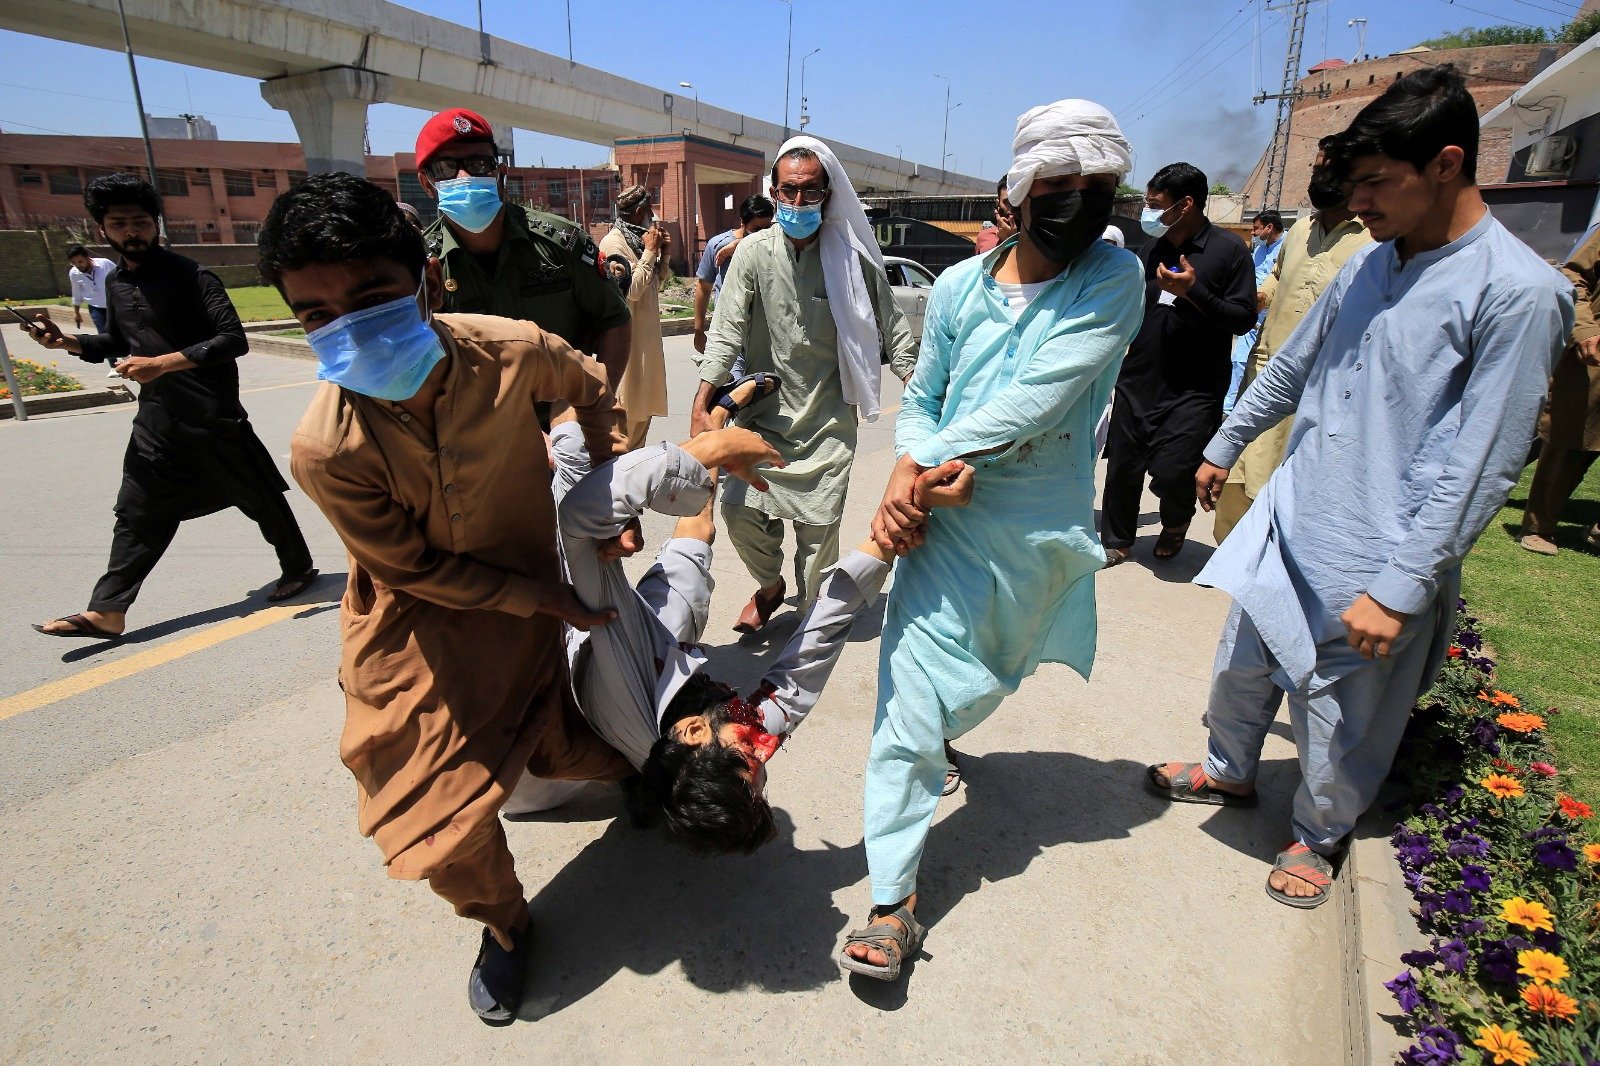 An injured man is carried away as supporters of Pakistan's former Prime Minister Imran Khan after clash with police in Peshawar, Pakistan, May 10, 2023. (EPA Photo)